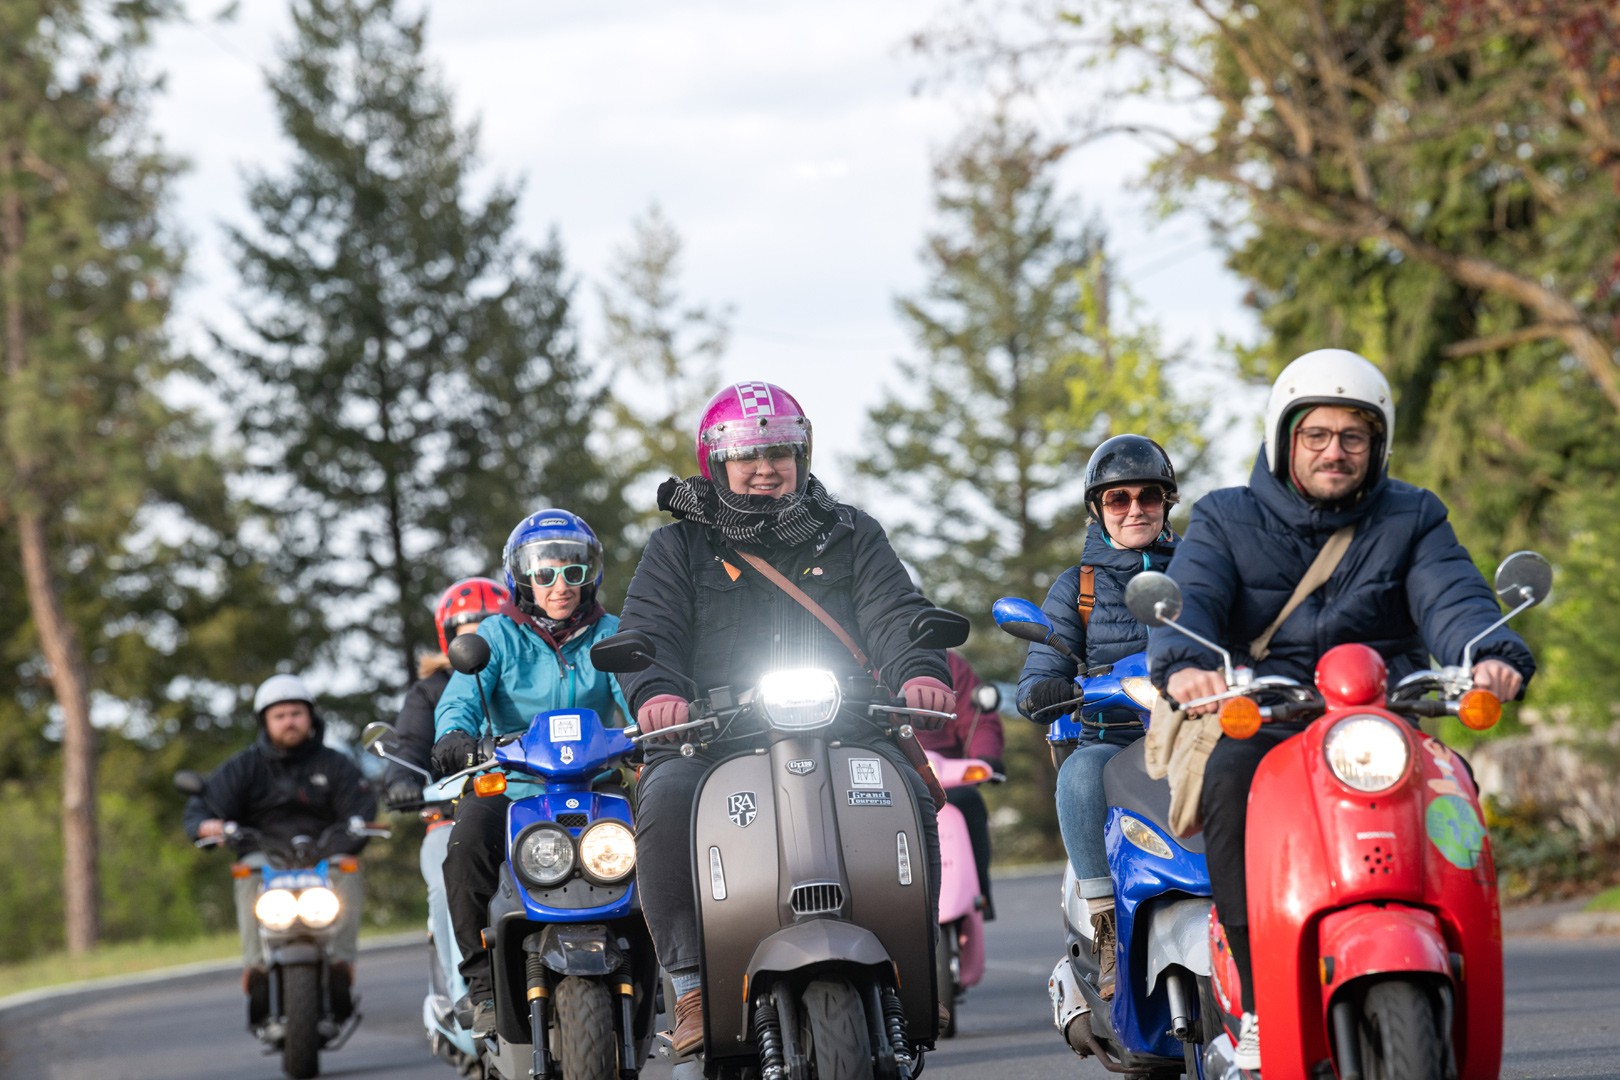 Meet Mild Spokane's chillest (and only) scooter gang | Arts & Culture | Spokane | The Pacific Northwest Inlander | Politics, Calendar, Events in Spokane, Coeur d'Alene and